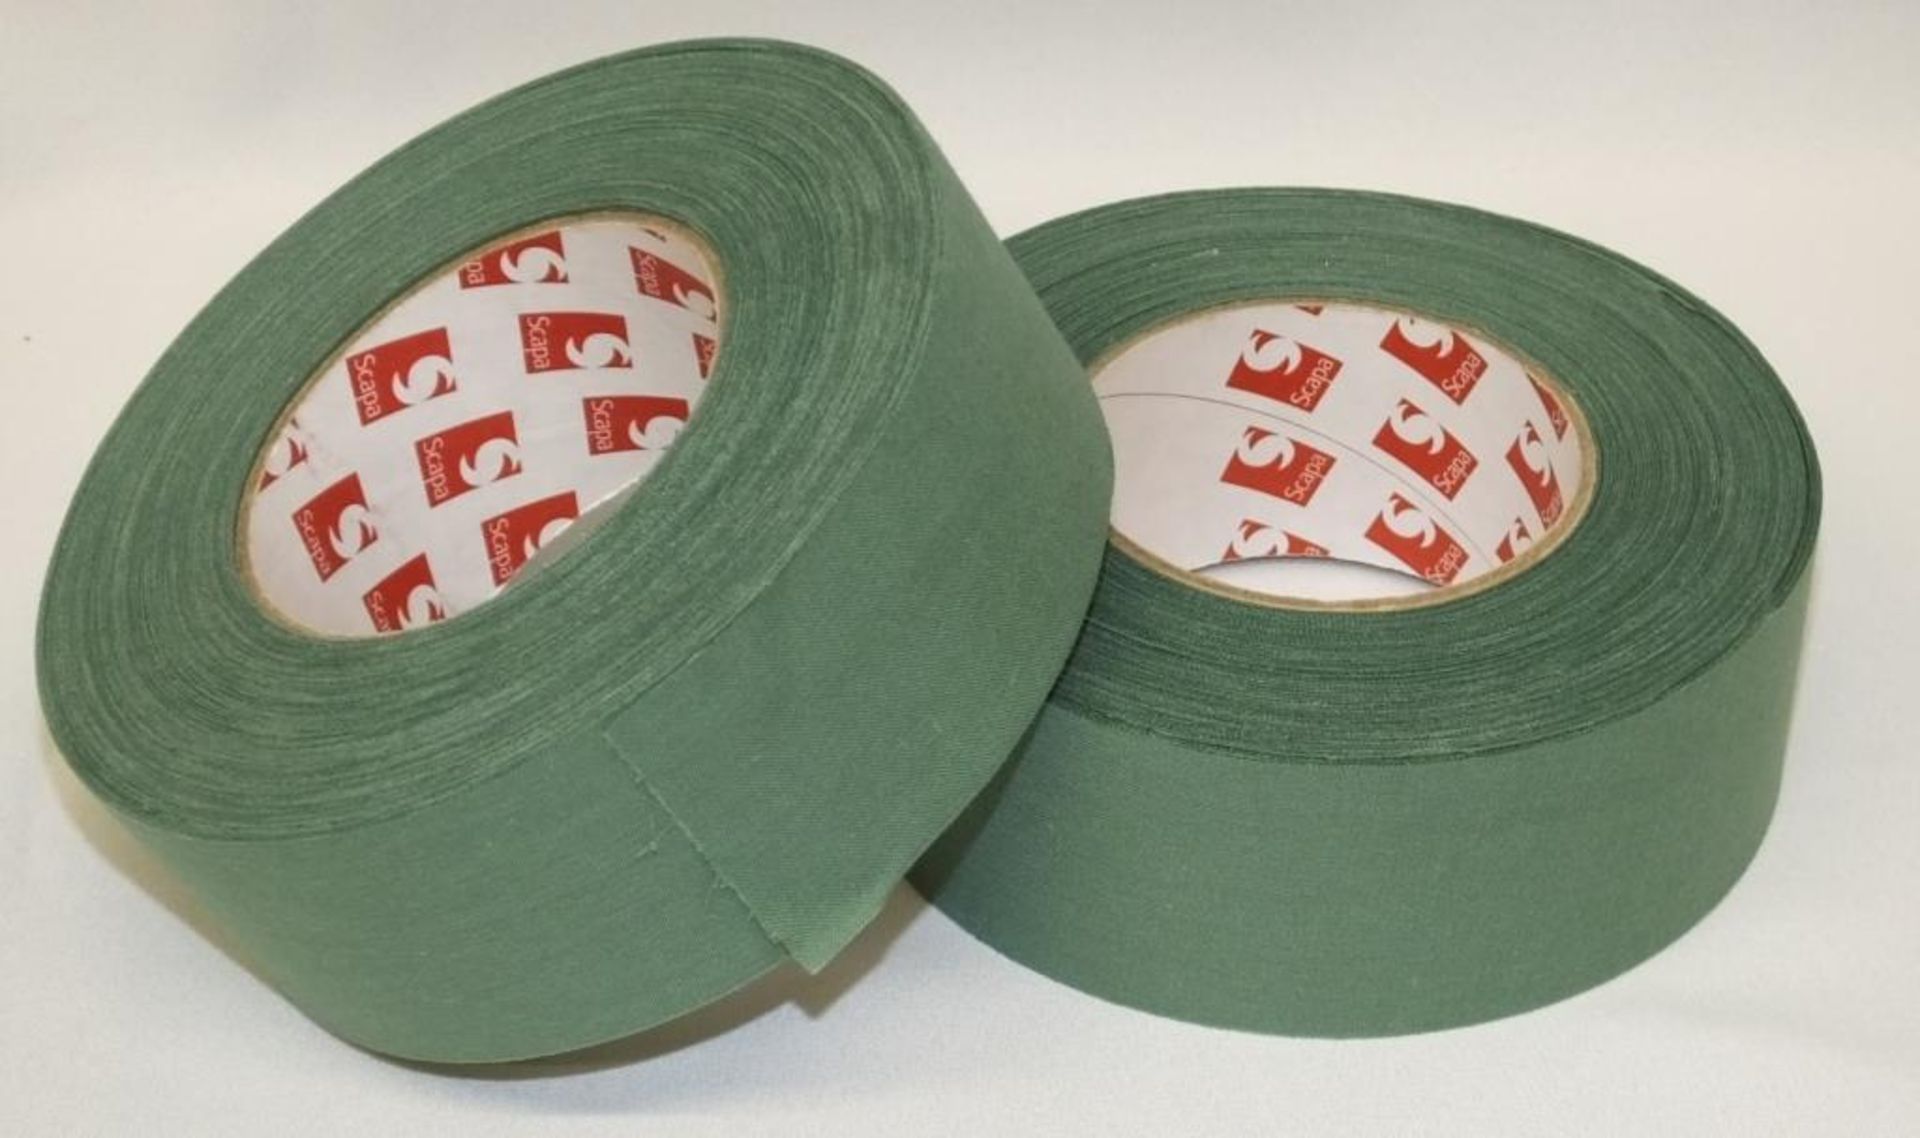 Scapa 3302 Pro Tape - Olive Green - 50mm x 50M rolls - 16 rolls per box - 40 boxes - Image 7 of 7